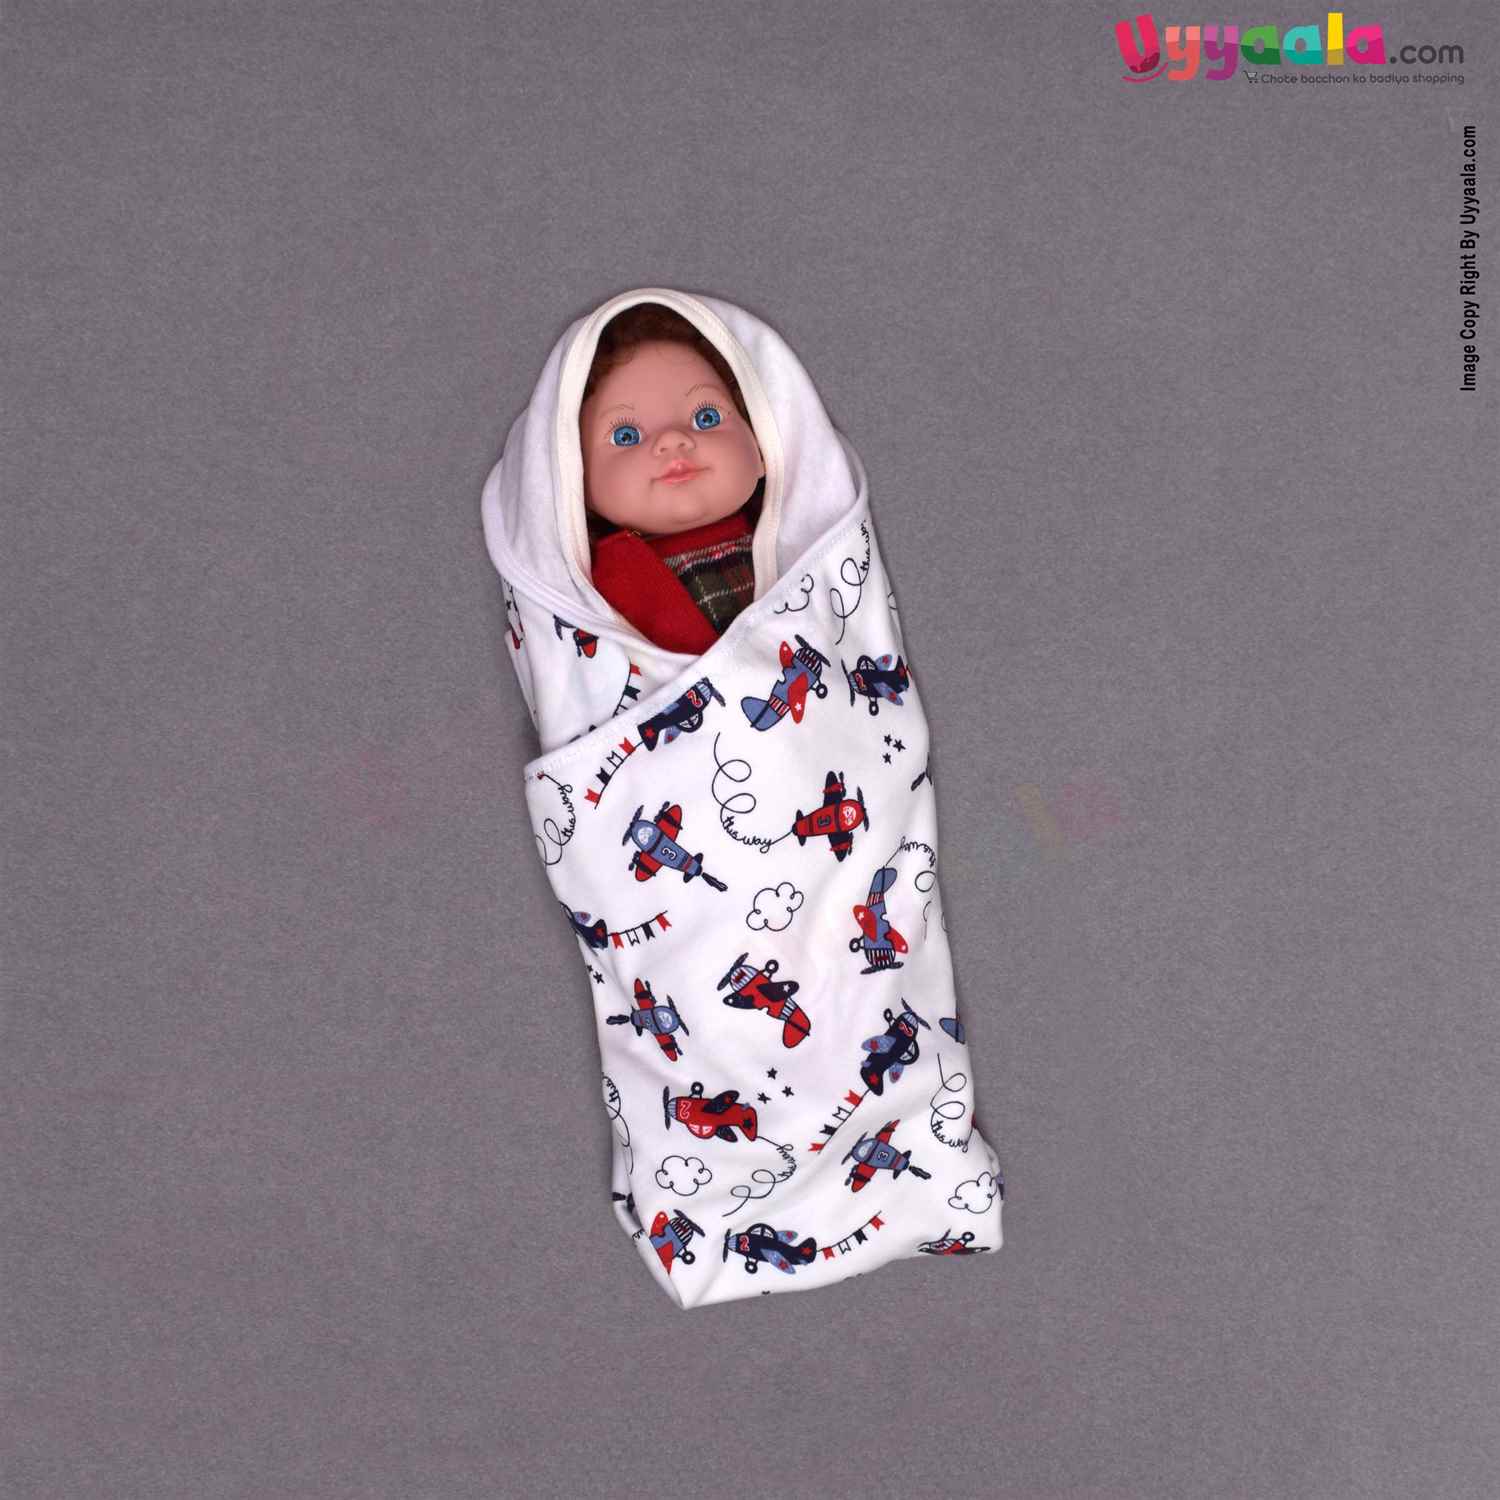 Dual layered Terry Cotton Hooded Baby Towel with Teddy Bear & Aeroplane Prints - 0+m, Size (94*65cm), White & Multicolor